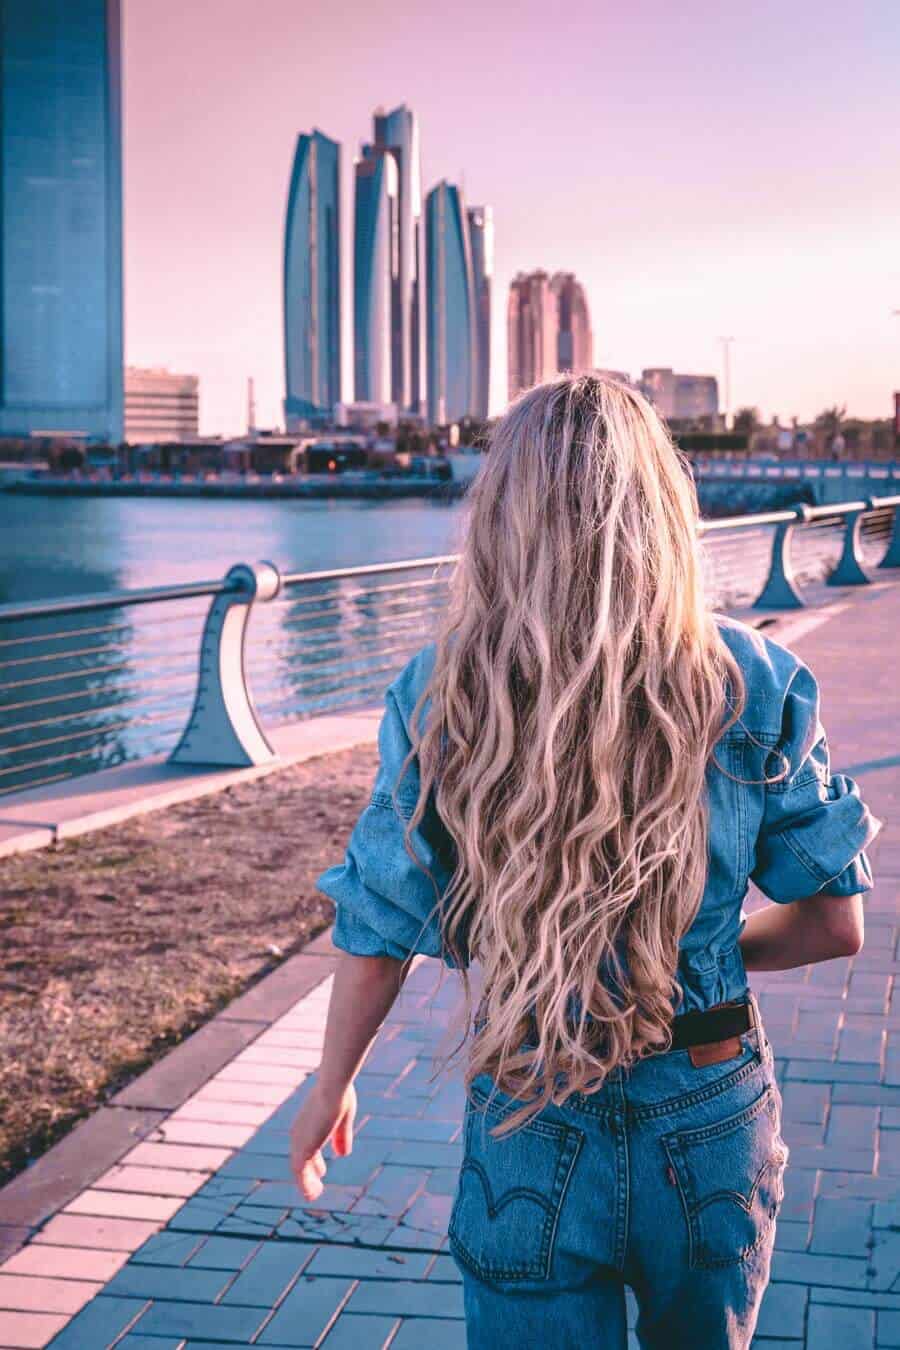 Looking for some clip in hair? The Best Clip in Hair Extensions I Have Ever Found (and the Cheapest) for only $8 on Amazon.